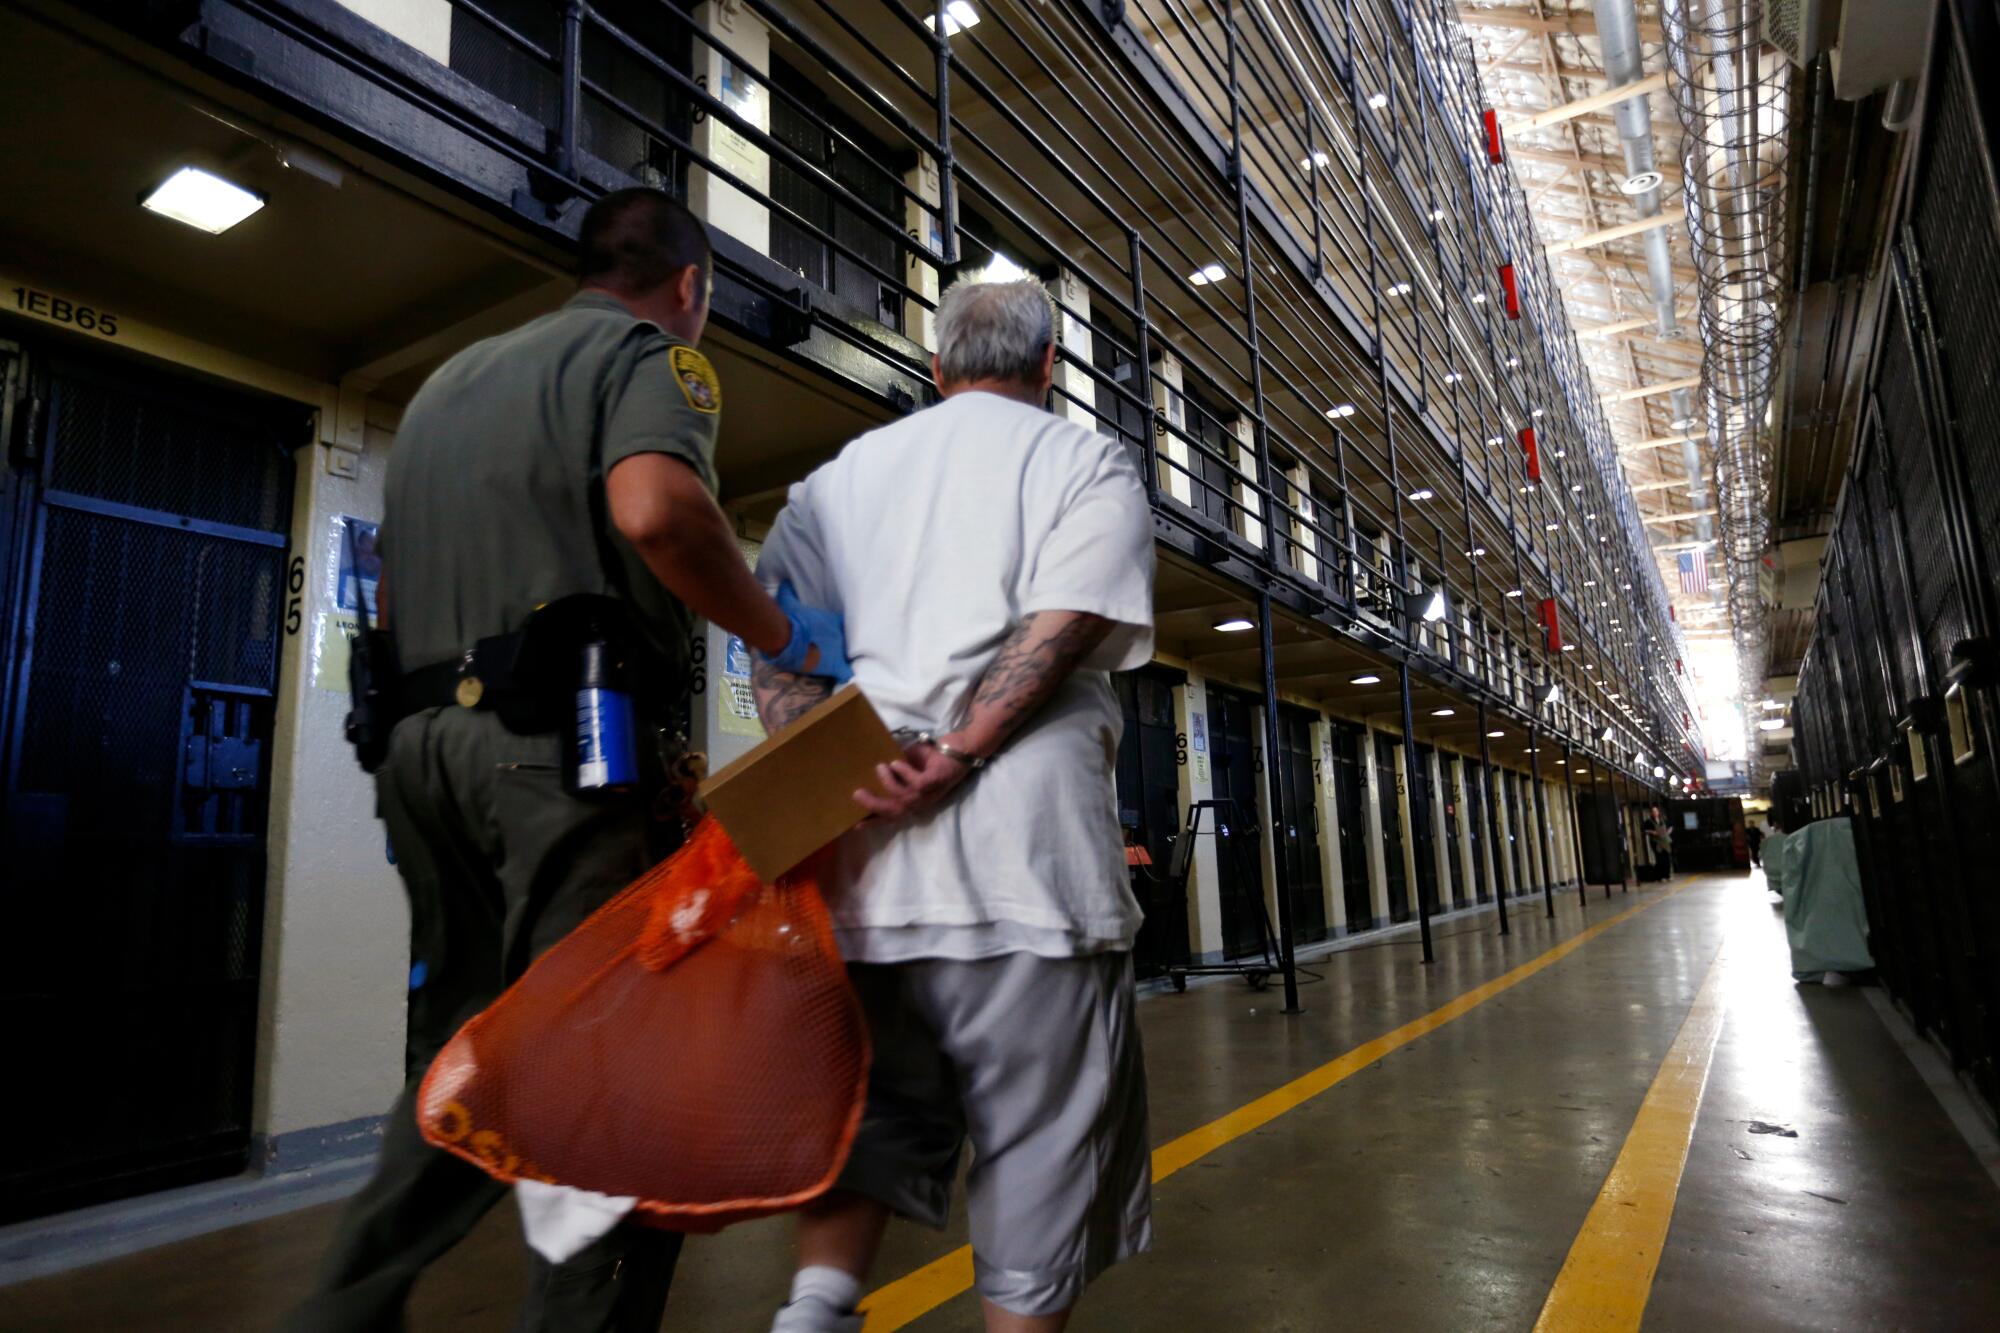 A death row inmate is escorted back to his cell in 2016 after spending time in the yard at San Quentin.